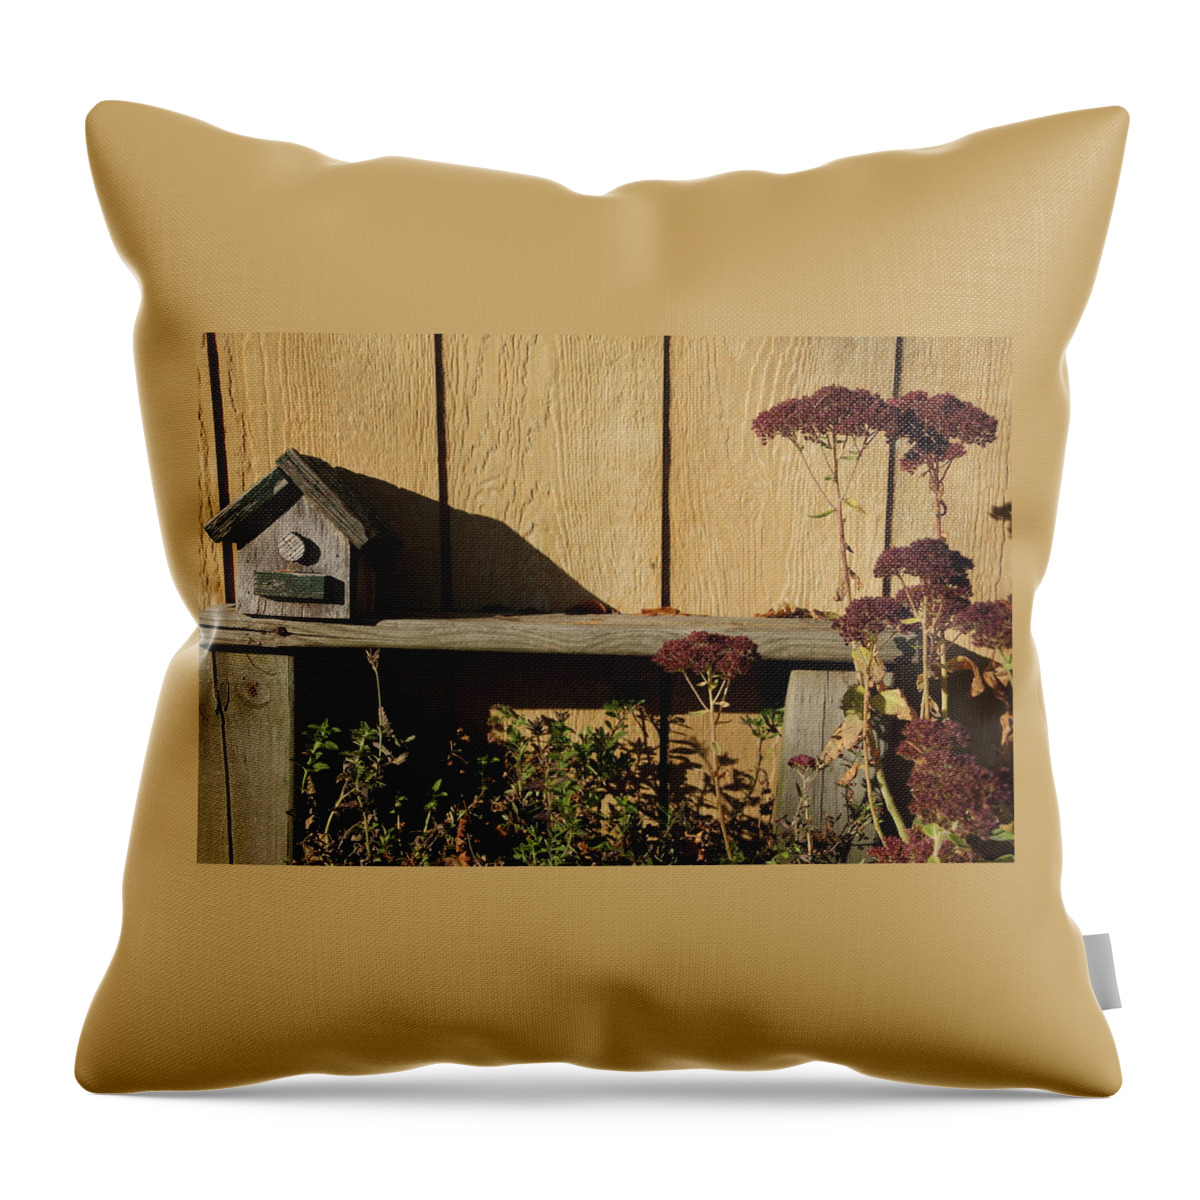 Bird House Throw Pillow featuring the photograph Bird House on Bench by Valerie Collins